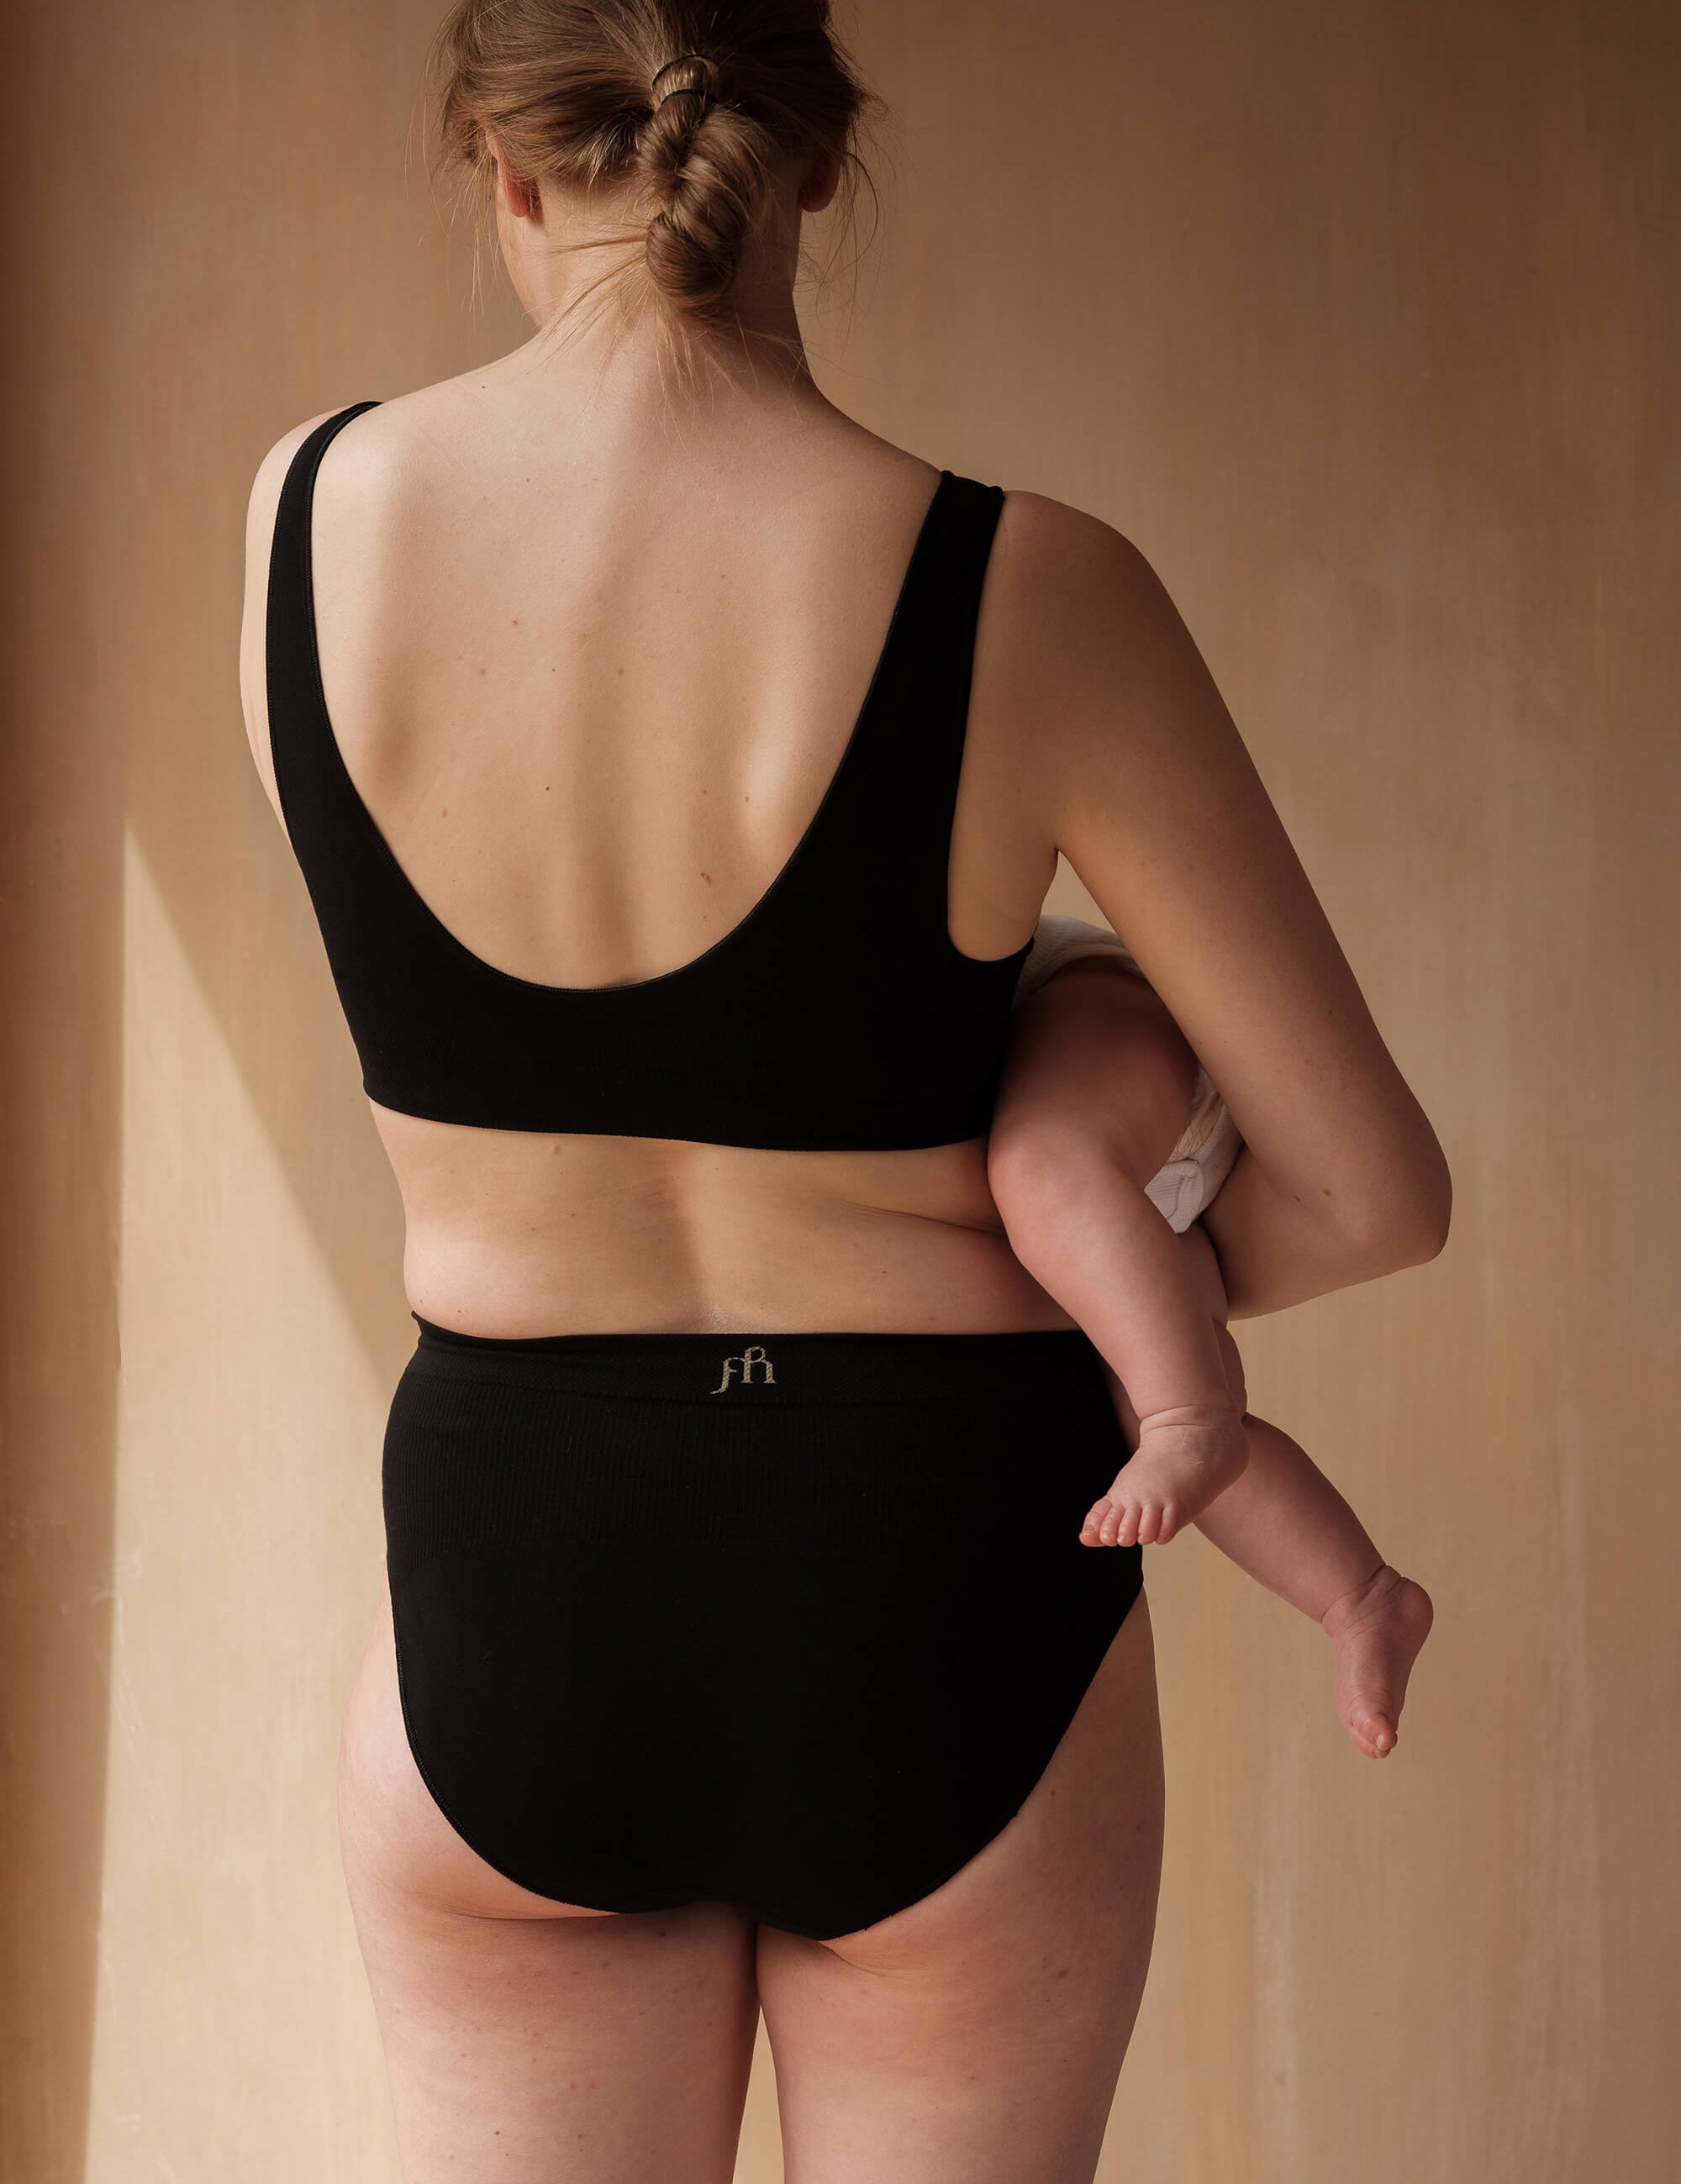 Discreture: Ethical & Sustainable Underwear Subscription by Molly